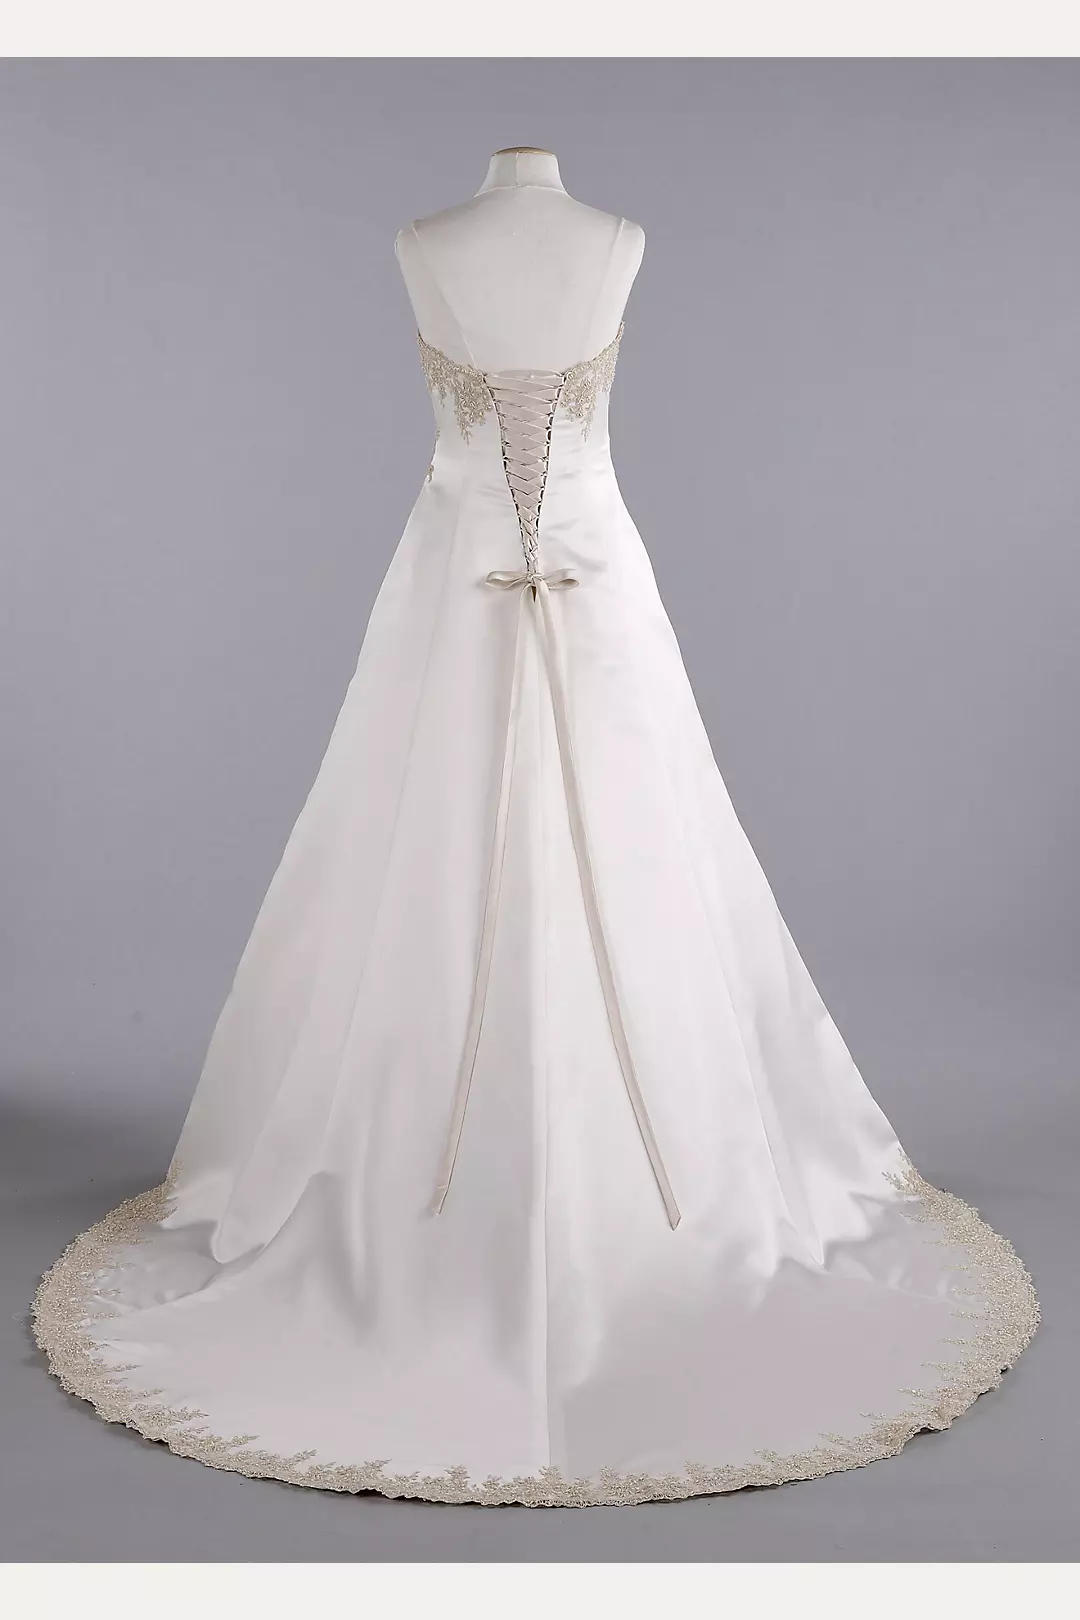 Strapless Satin Wedding Dress with Beaded Lace  Image 2